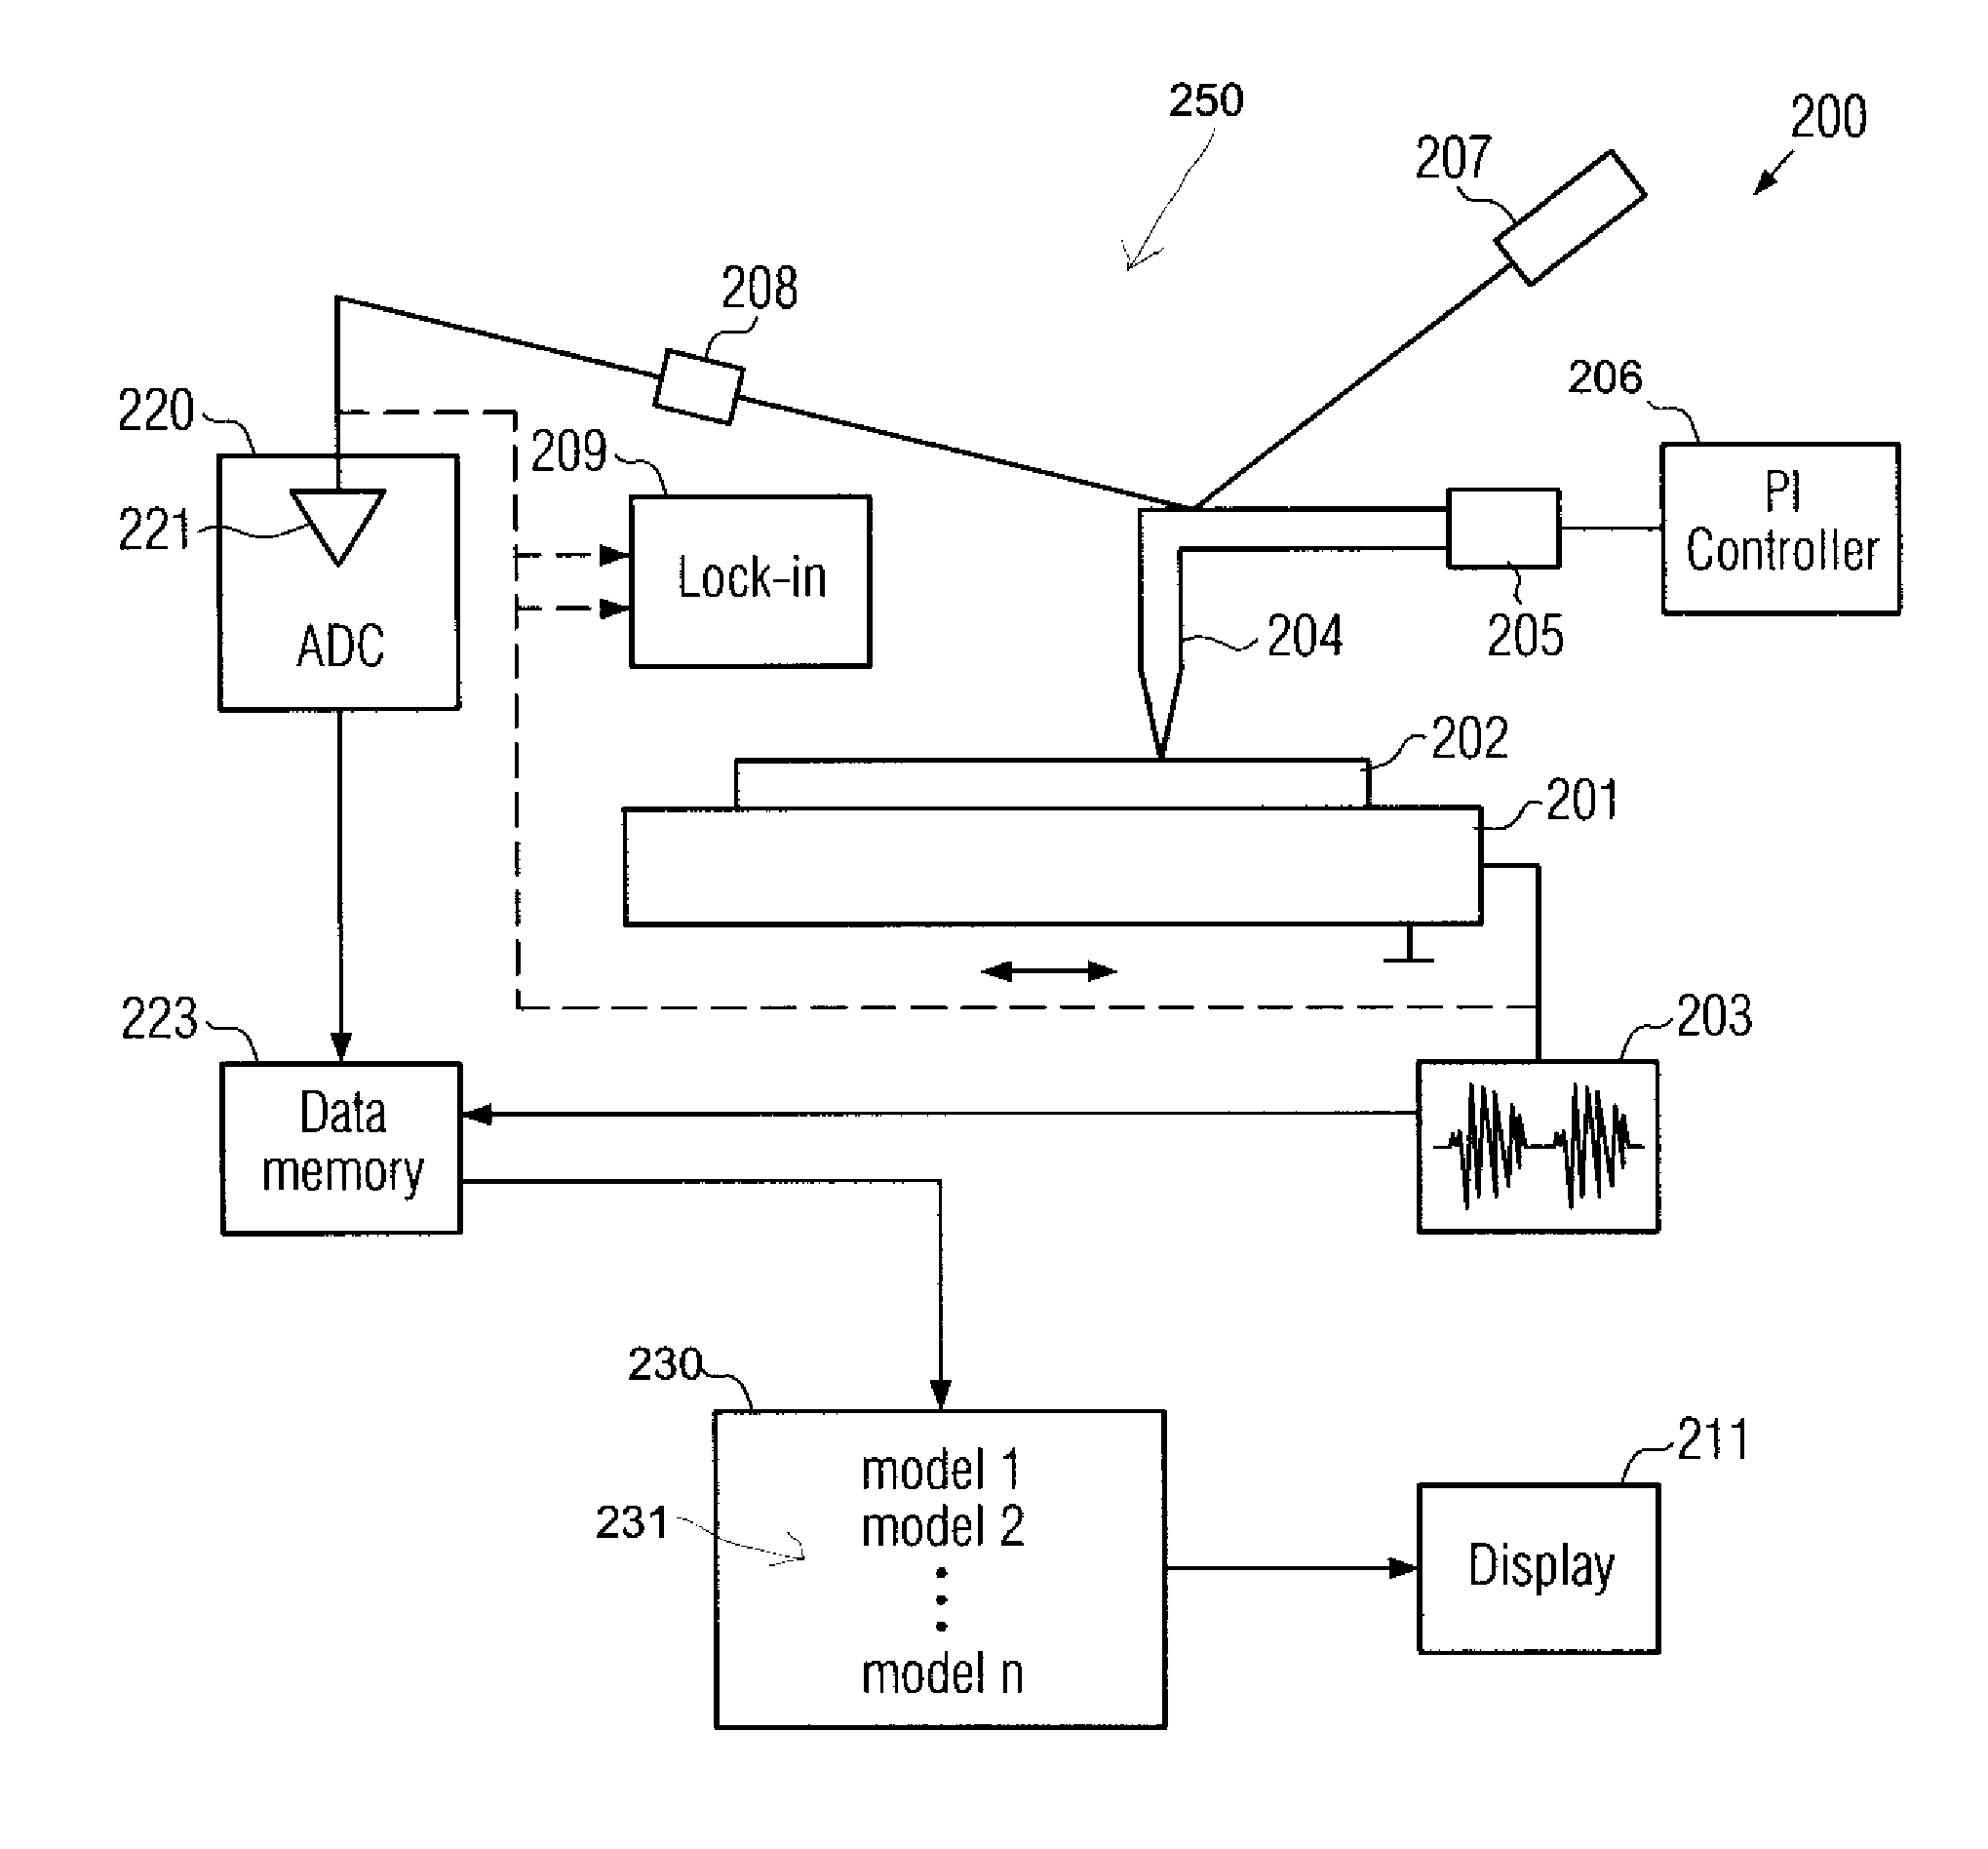 Method and apparatus for determining surface characteristics by using spm techniques with acoustic excitation and real-time digitizing